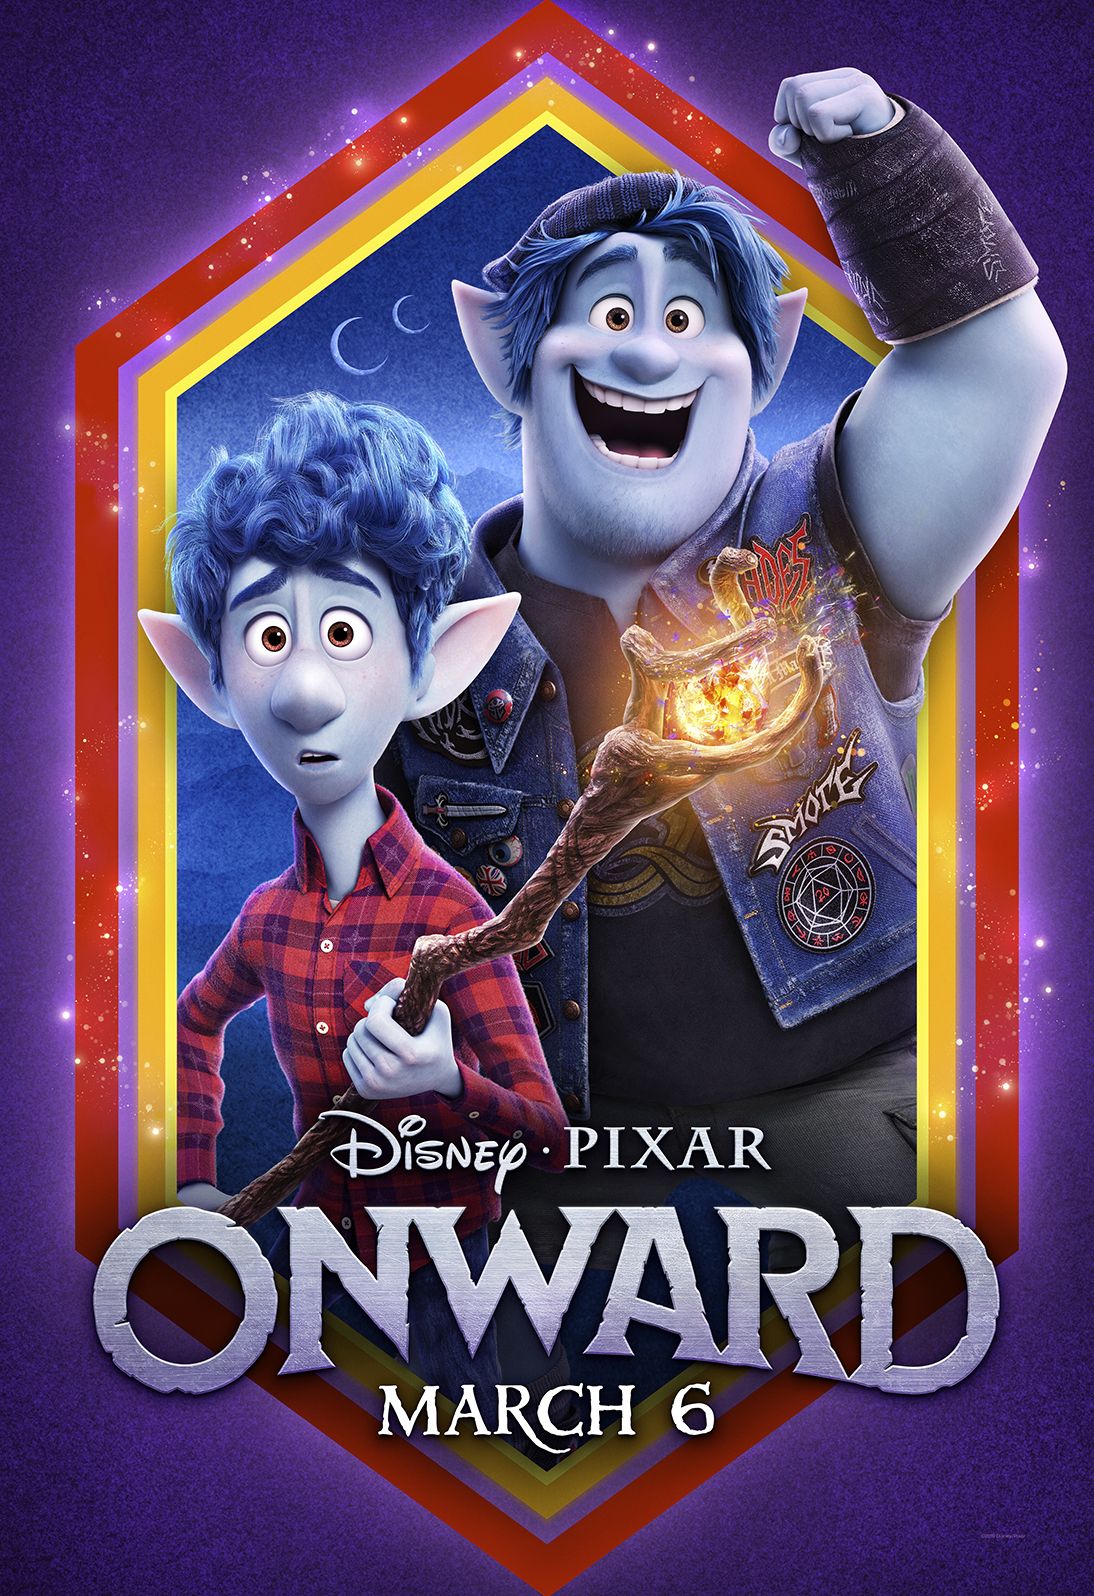 You Can Live Stream The Red Carpet Premiere Of Disney Pixar's